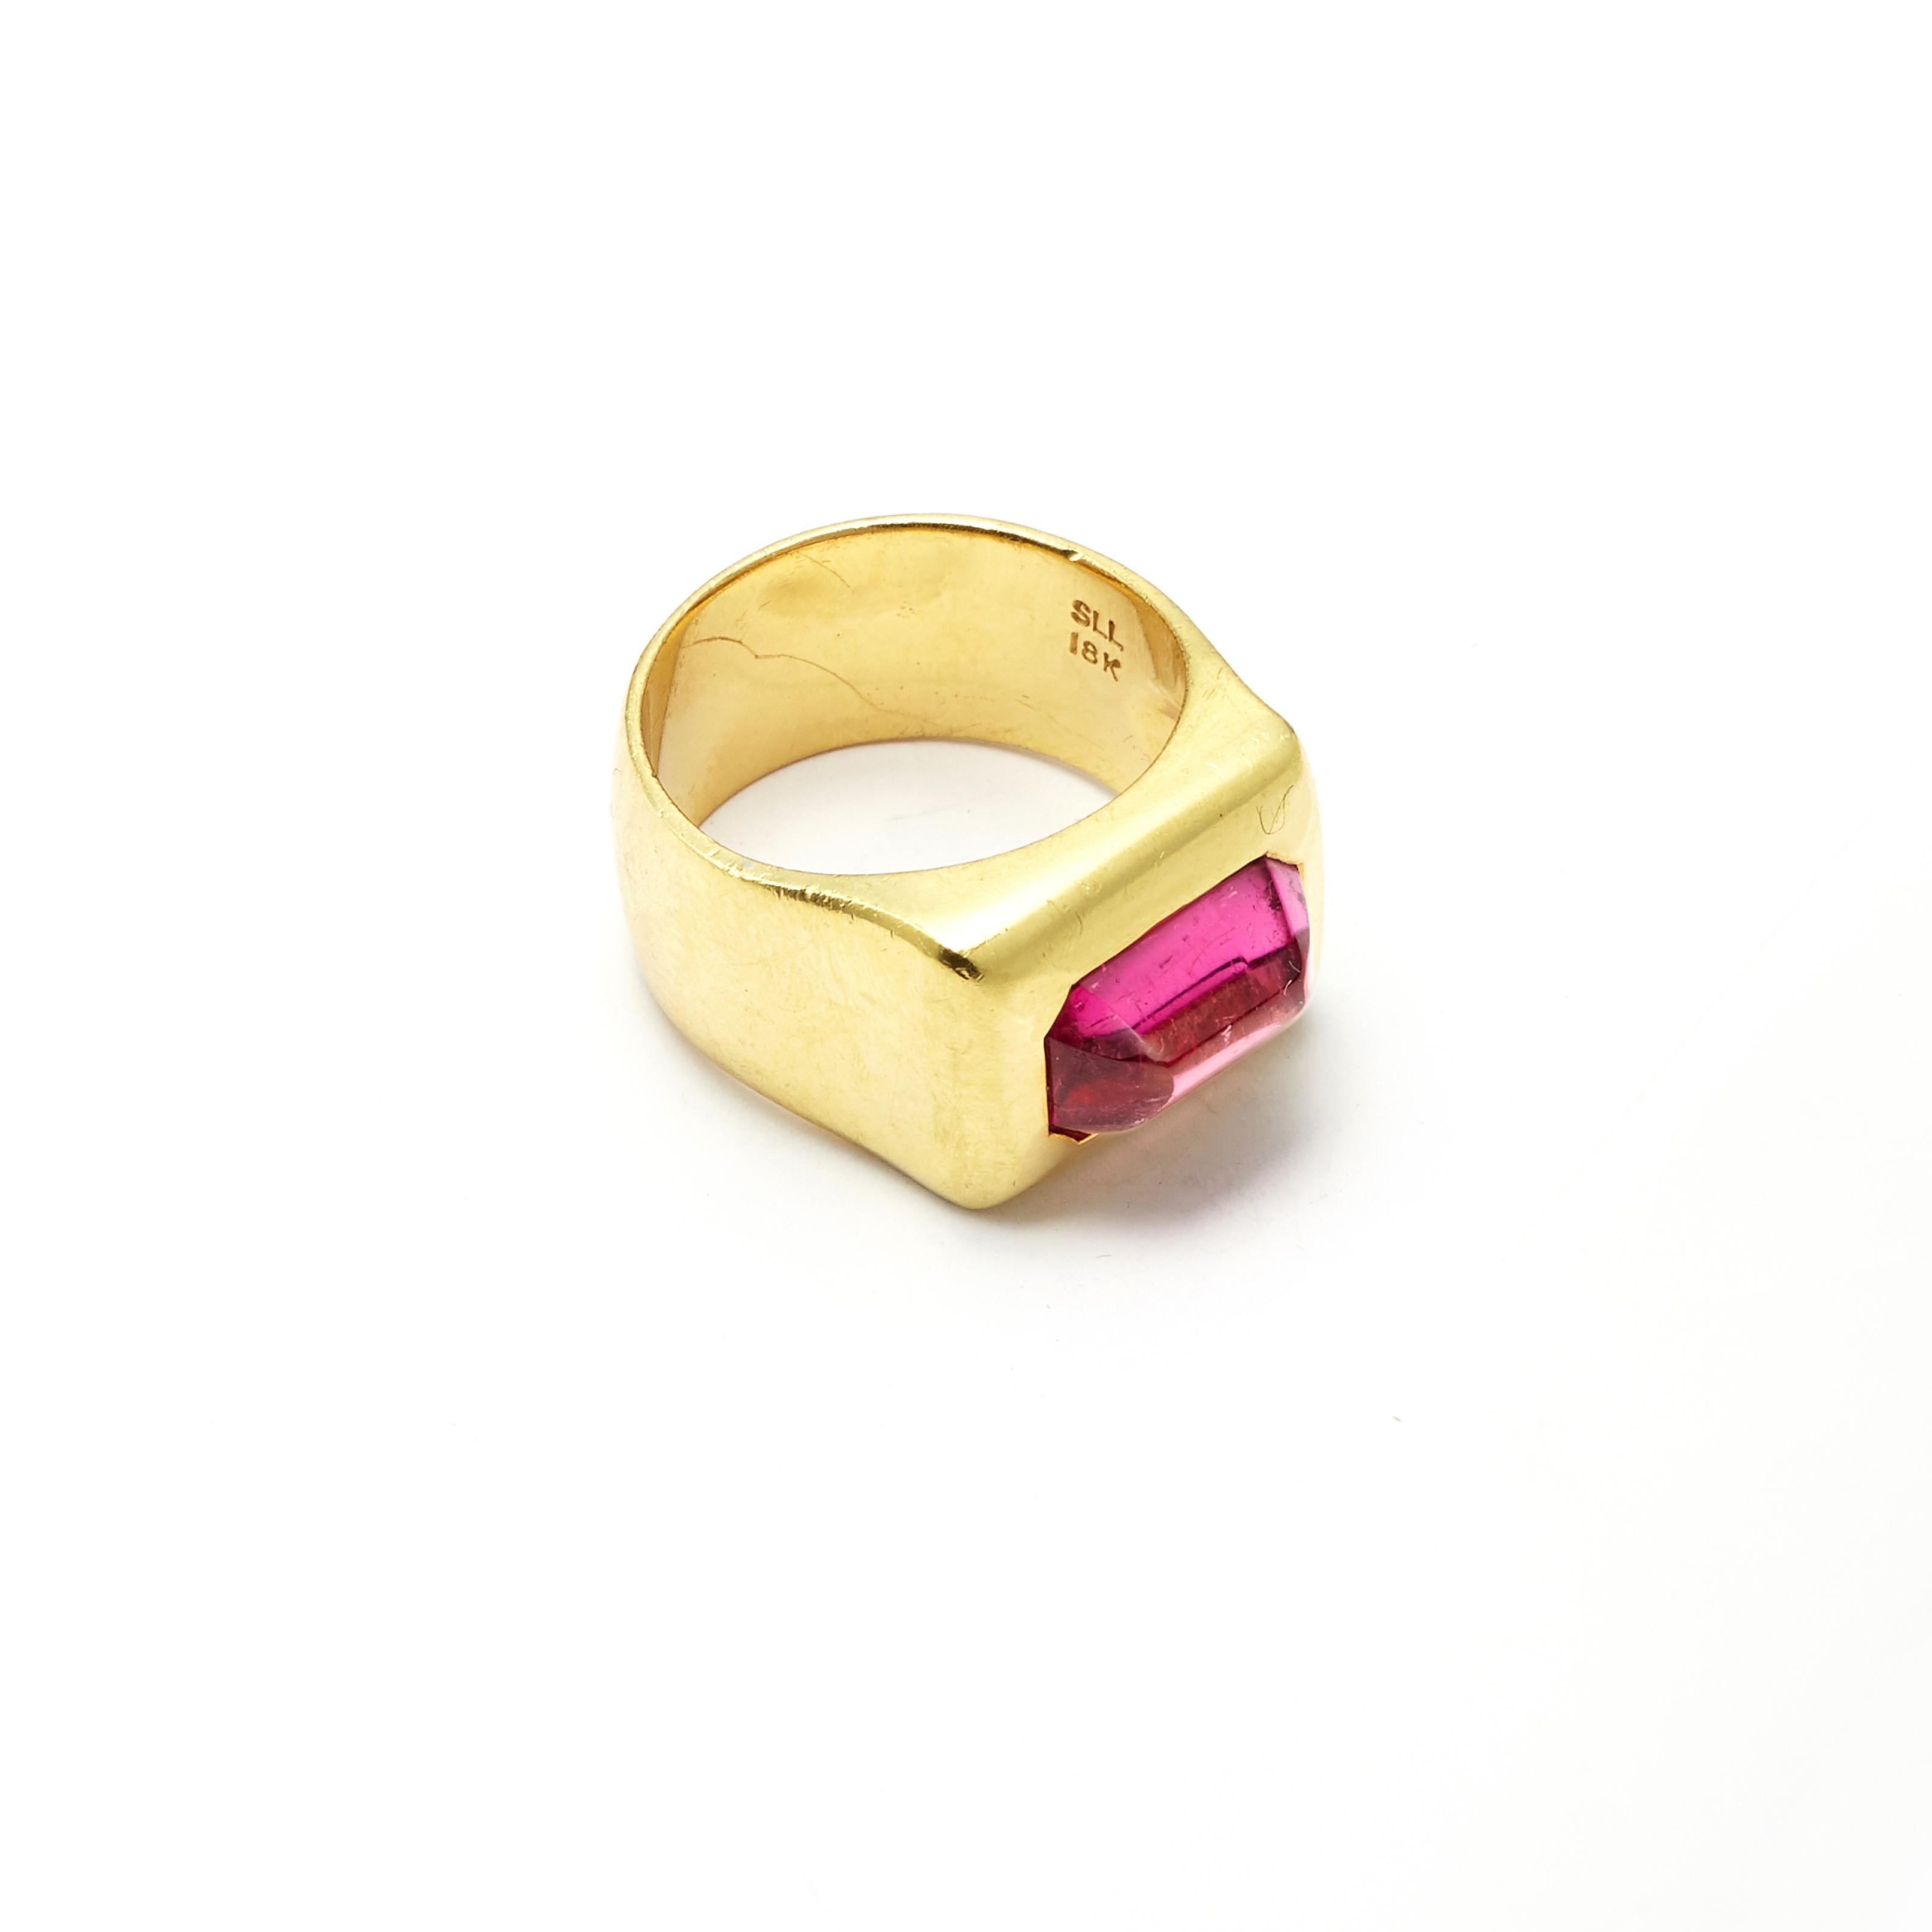 This exquisite 18 Karat Gold Greek Signet Ring is set with a Cabochon Cut Pink Tourmaline (2.87 Carat), so elegant in its simplicity.

Dimensions of Pink Tourmaline: 11.6mm x 7.3mm

Ring size*: 7 1/4

*Ring can be resized for a custom fit.
**Any